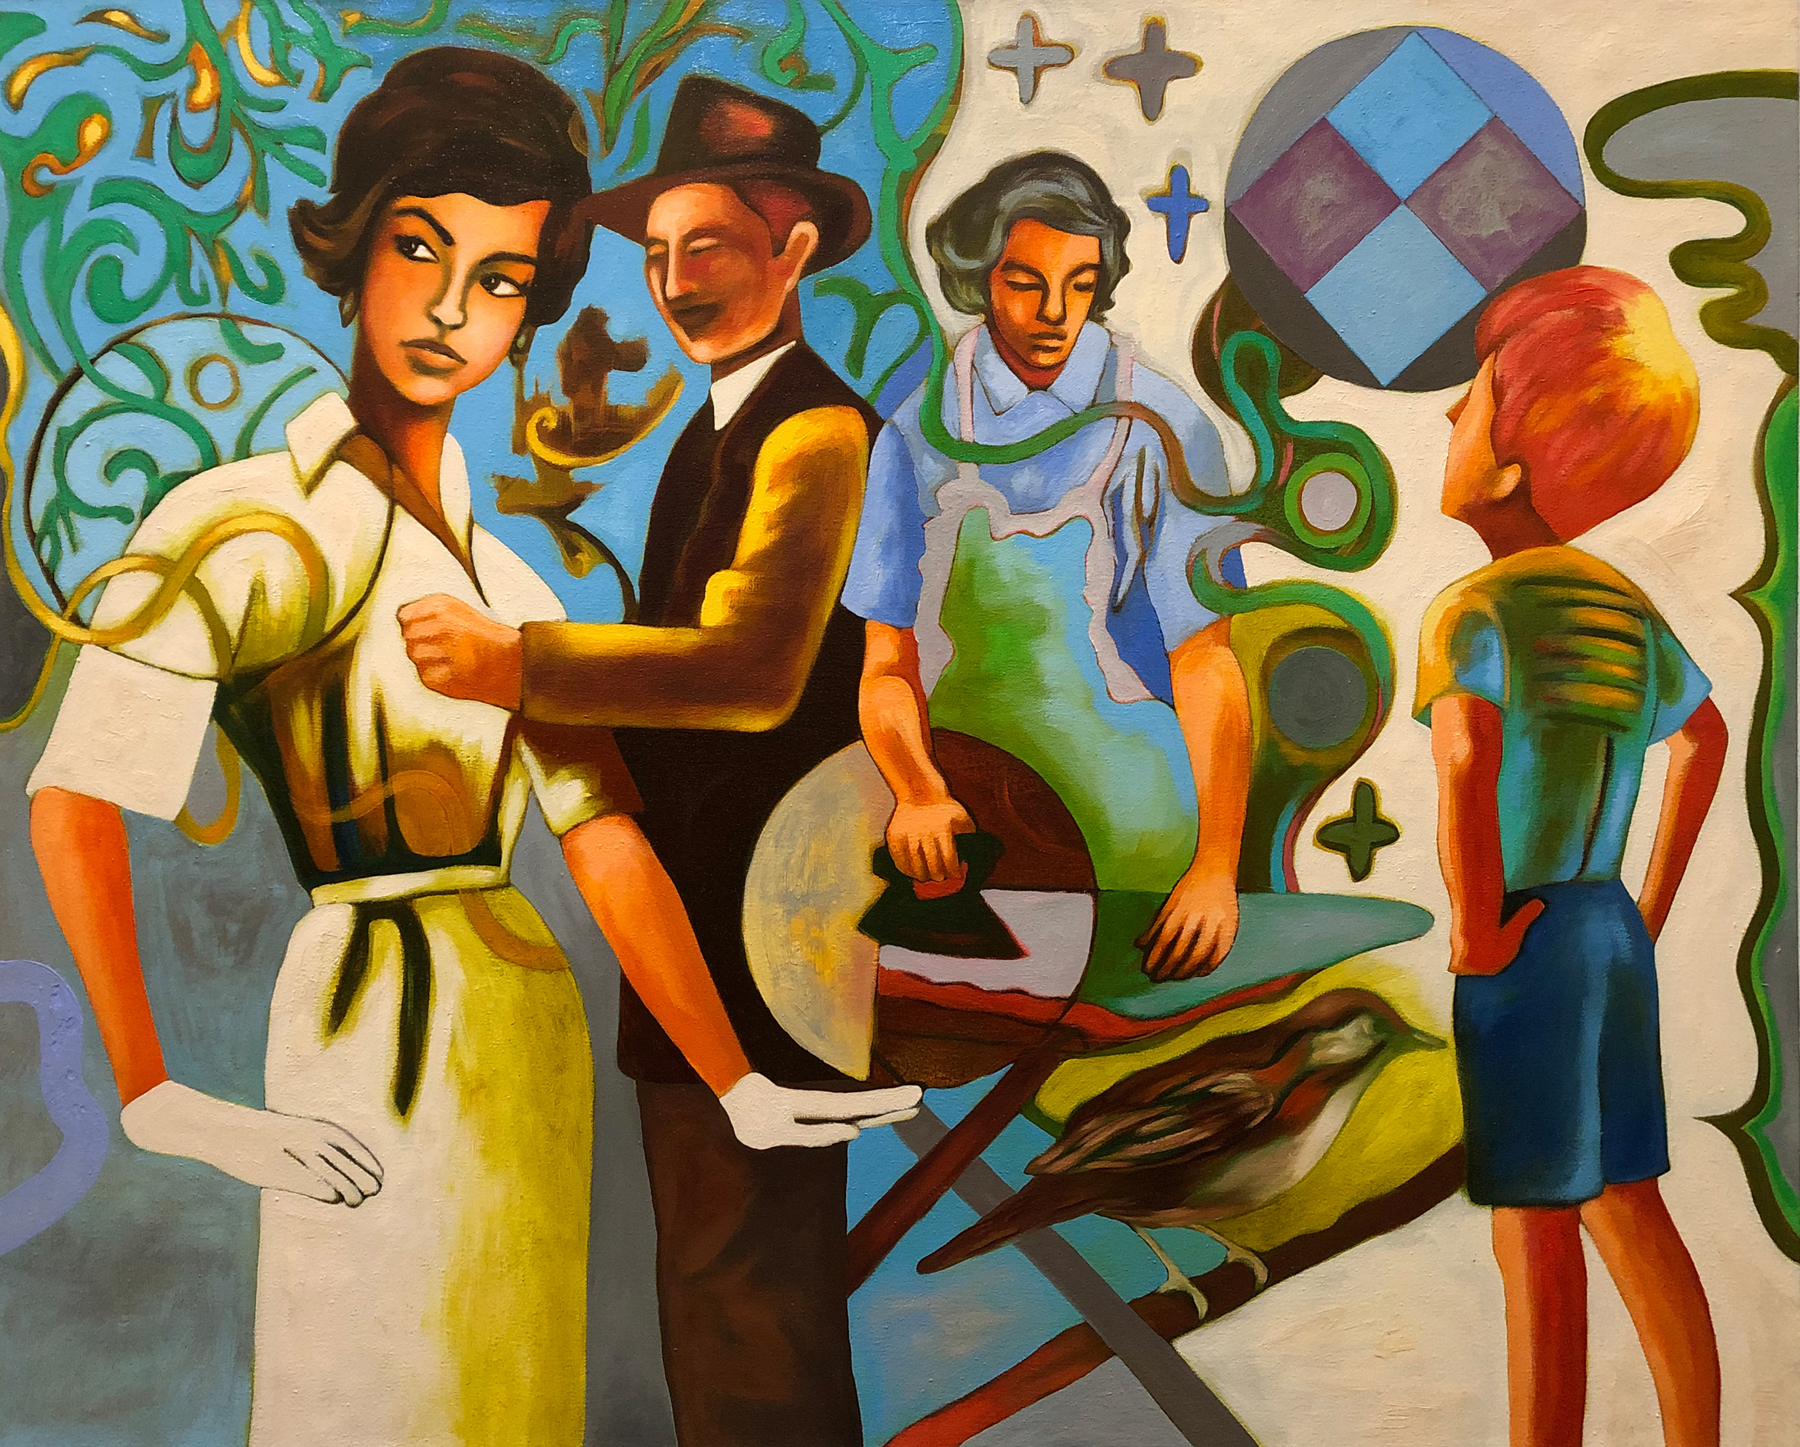 Getting Acquainted by Michael Tice 32” x 40” oil on canvas 2400